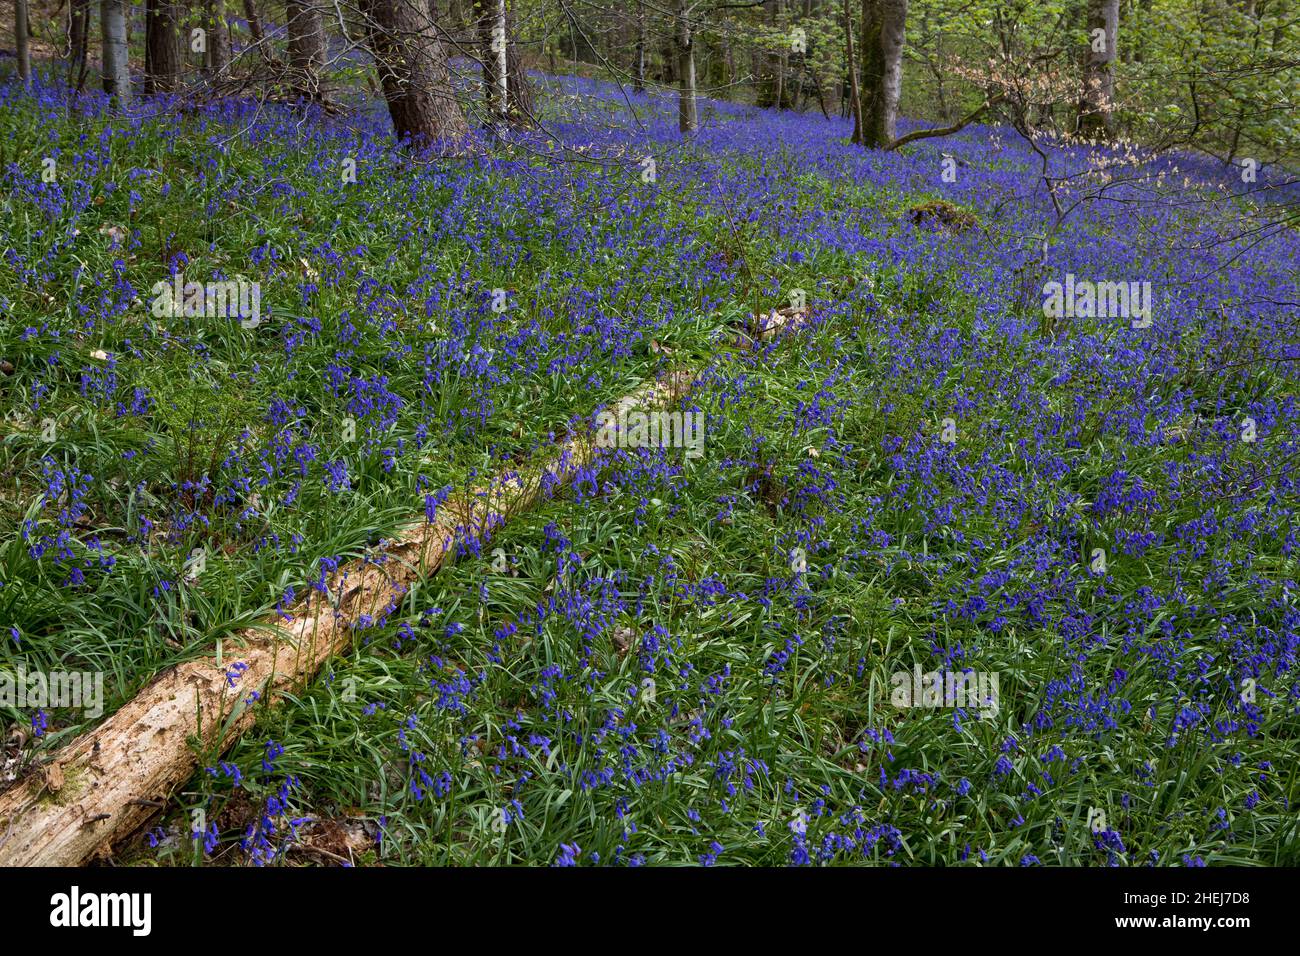 Bluebells in a UK woodland in springtime. UK wildflowers blooming in the trees. Ribble valley landscape Stock Photo